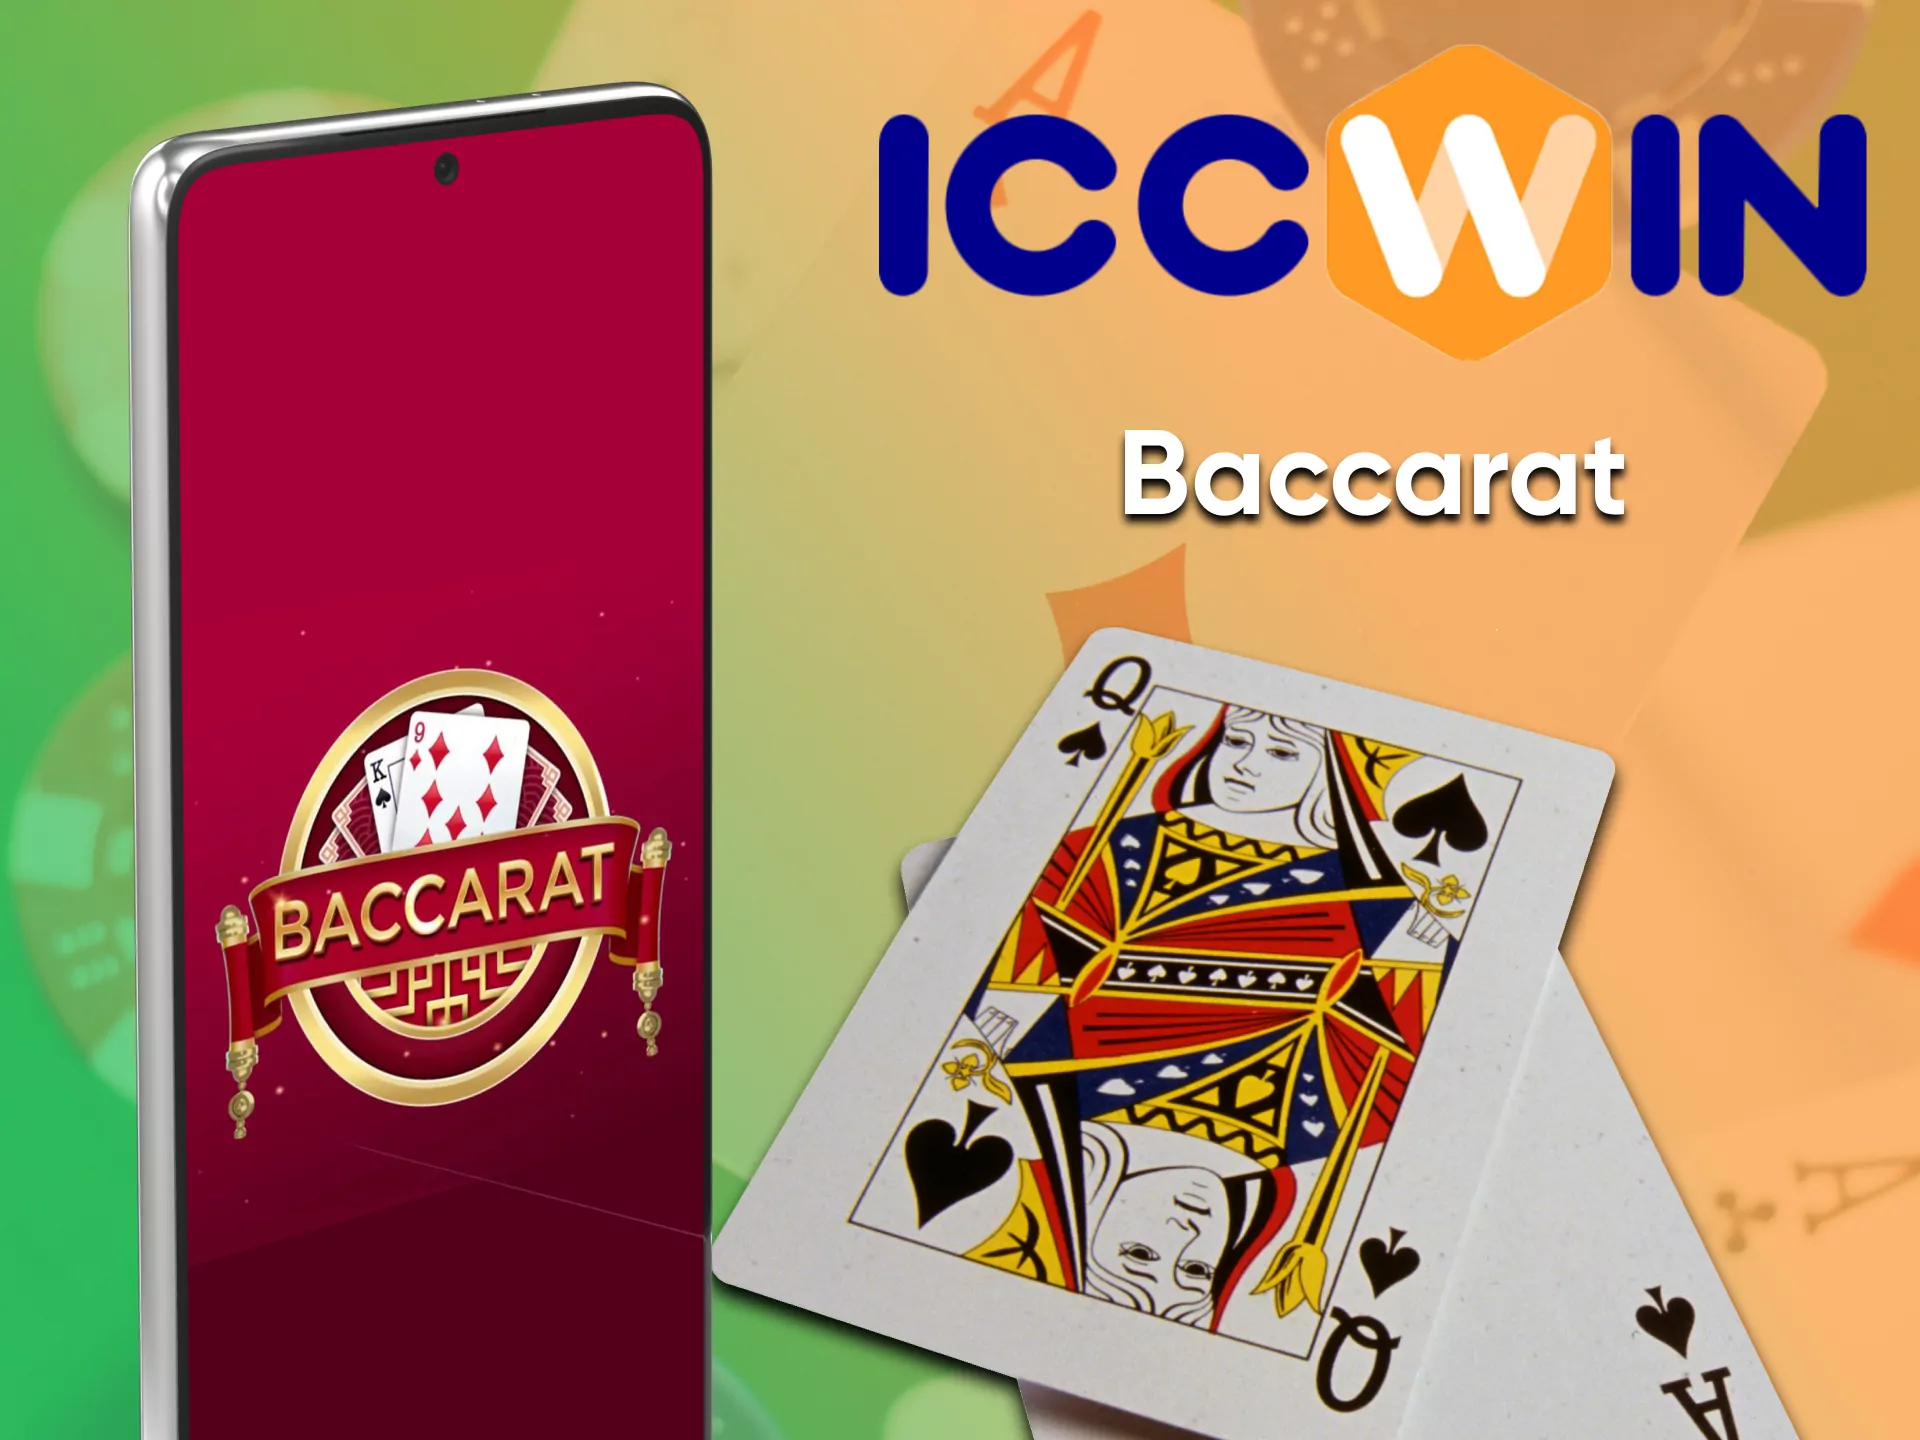 Choose a section with Baccarat from ICCWin.